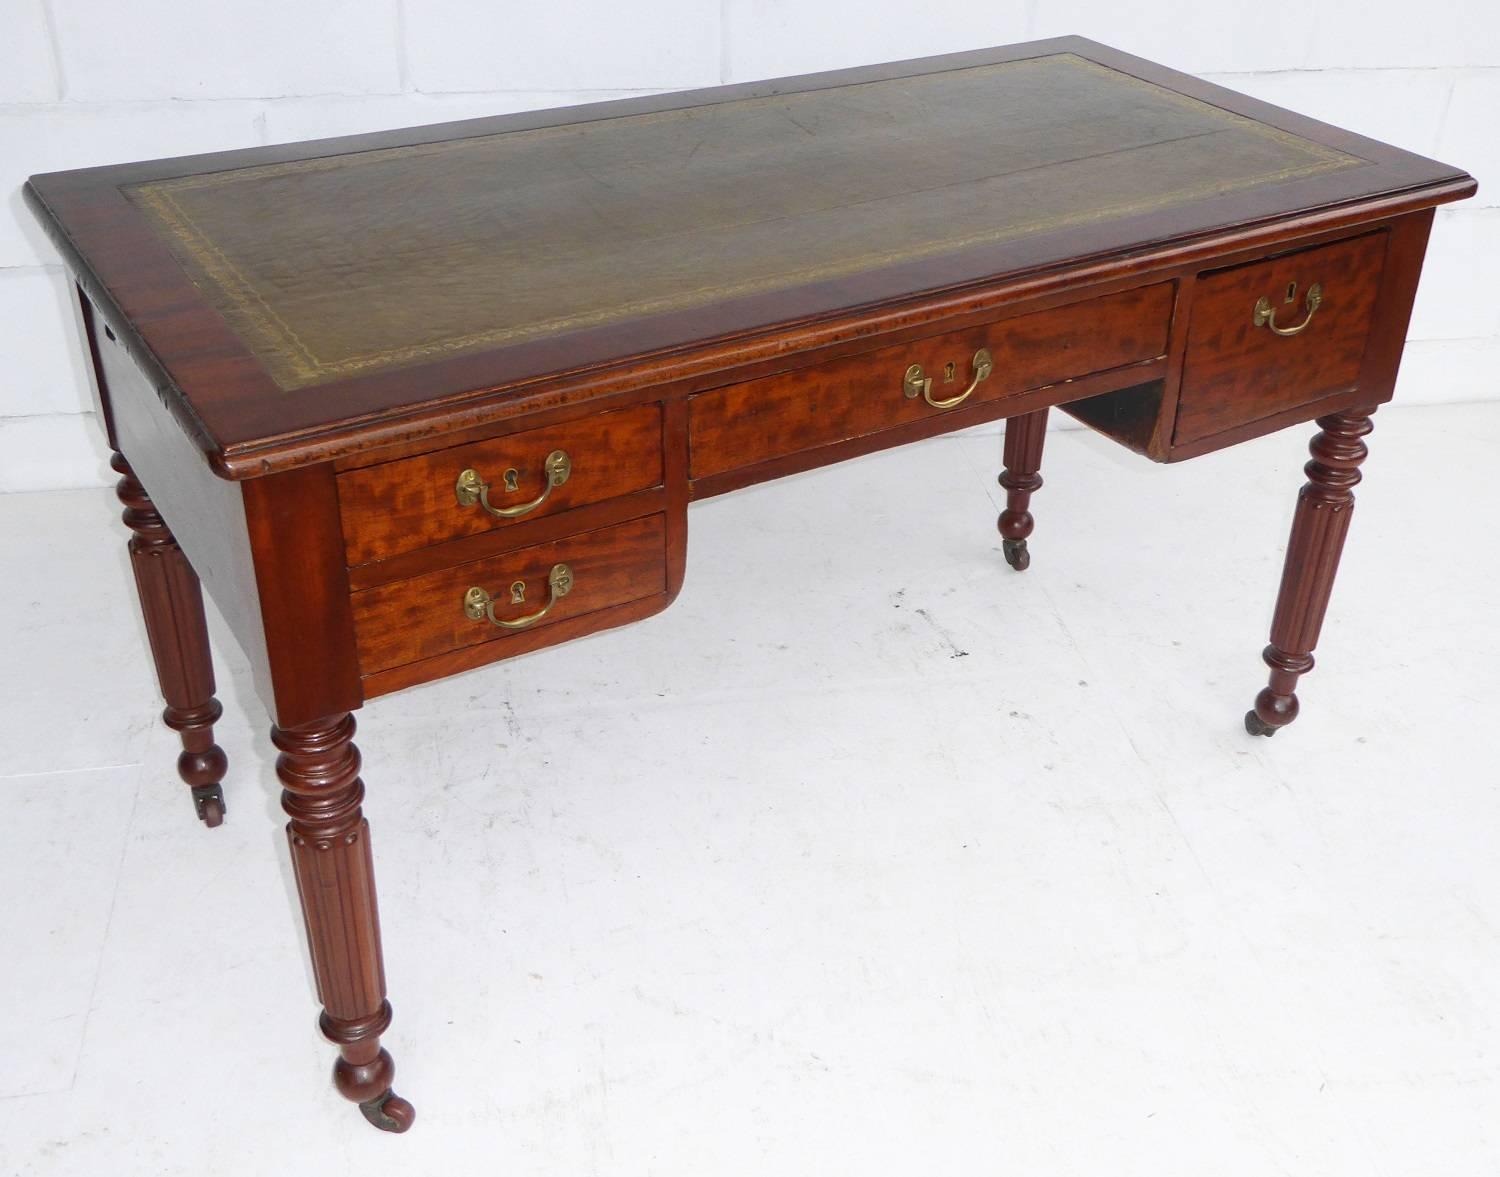 For sale is a good quality William IV mahogany writing table. The top of the writing table has a green leather insert, with decorative tooling. The top also has a pull-out slide on either side, revealing a further leather writing surface. The desk